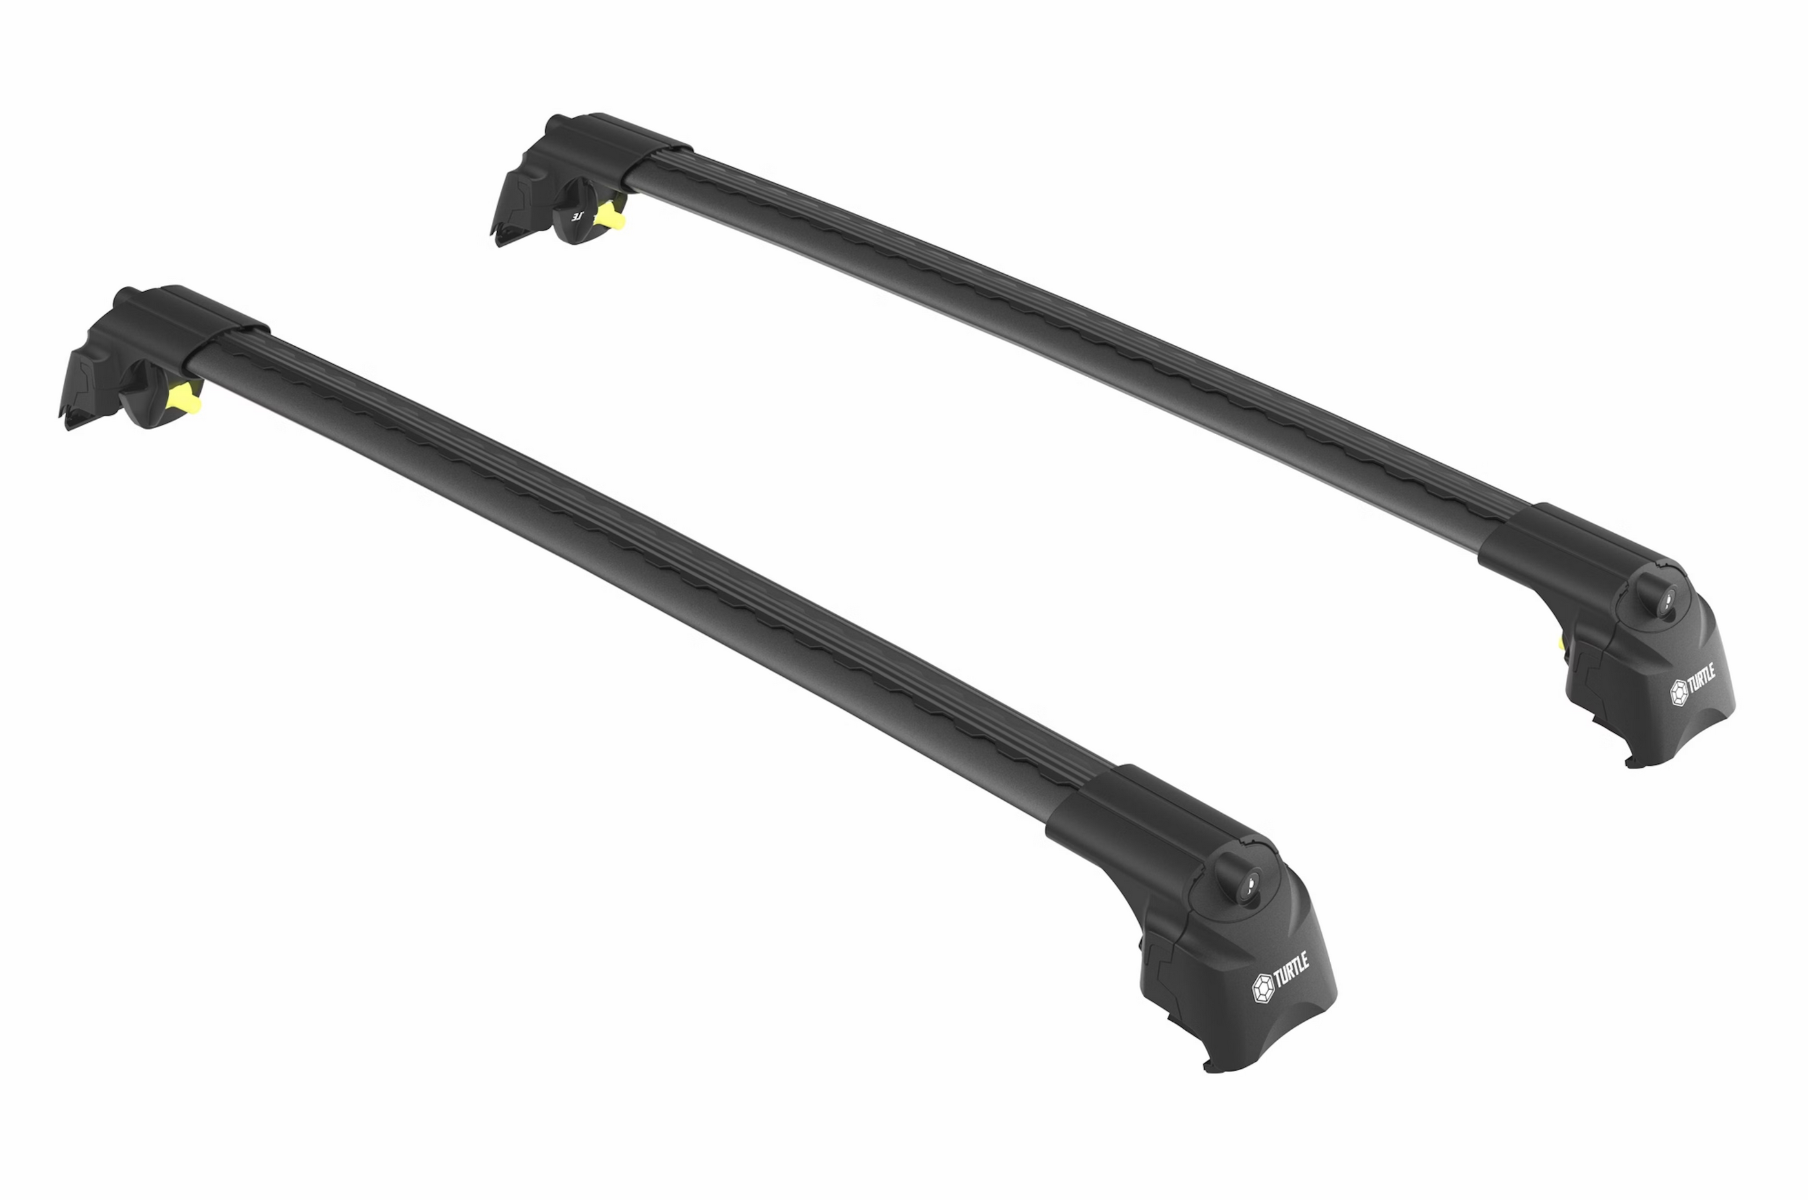 Turtle Air2 Black 2 Bar for KIA Carnival 5dr Wagon with Flush Roof Rail (2014 to 2020)